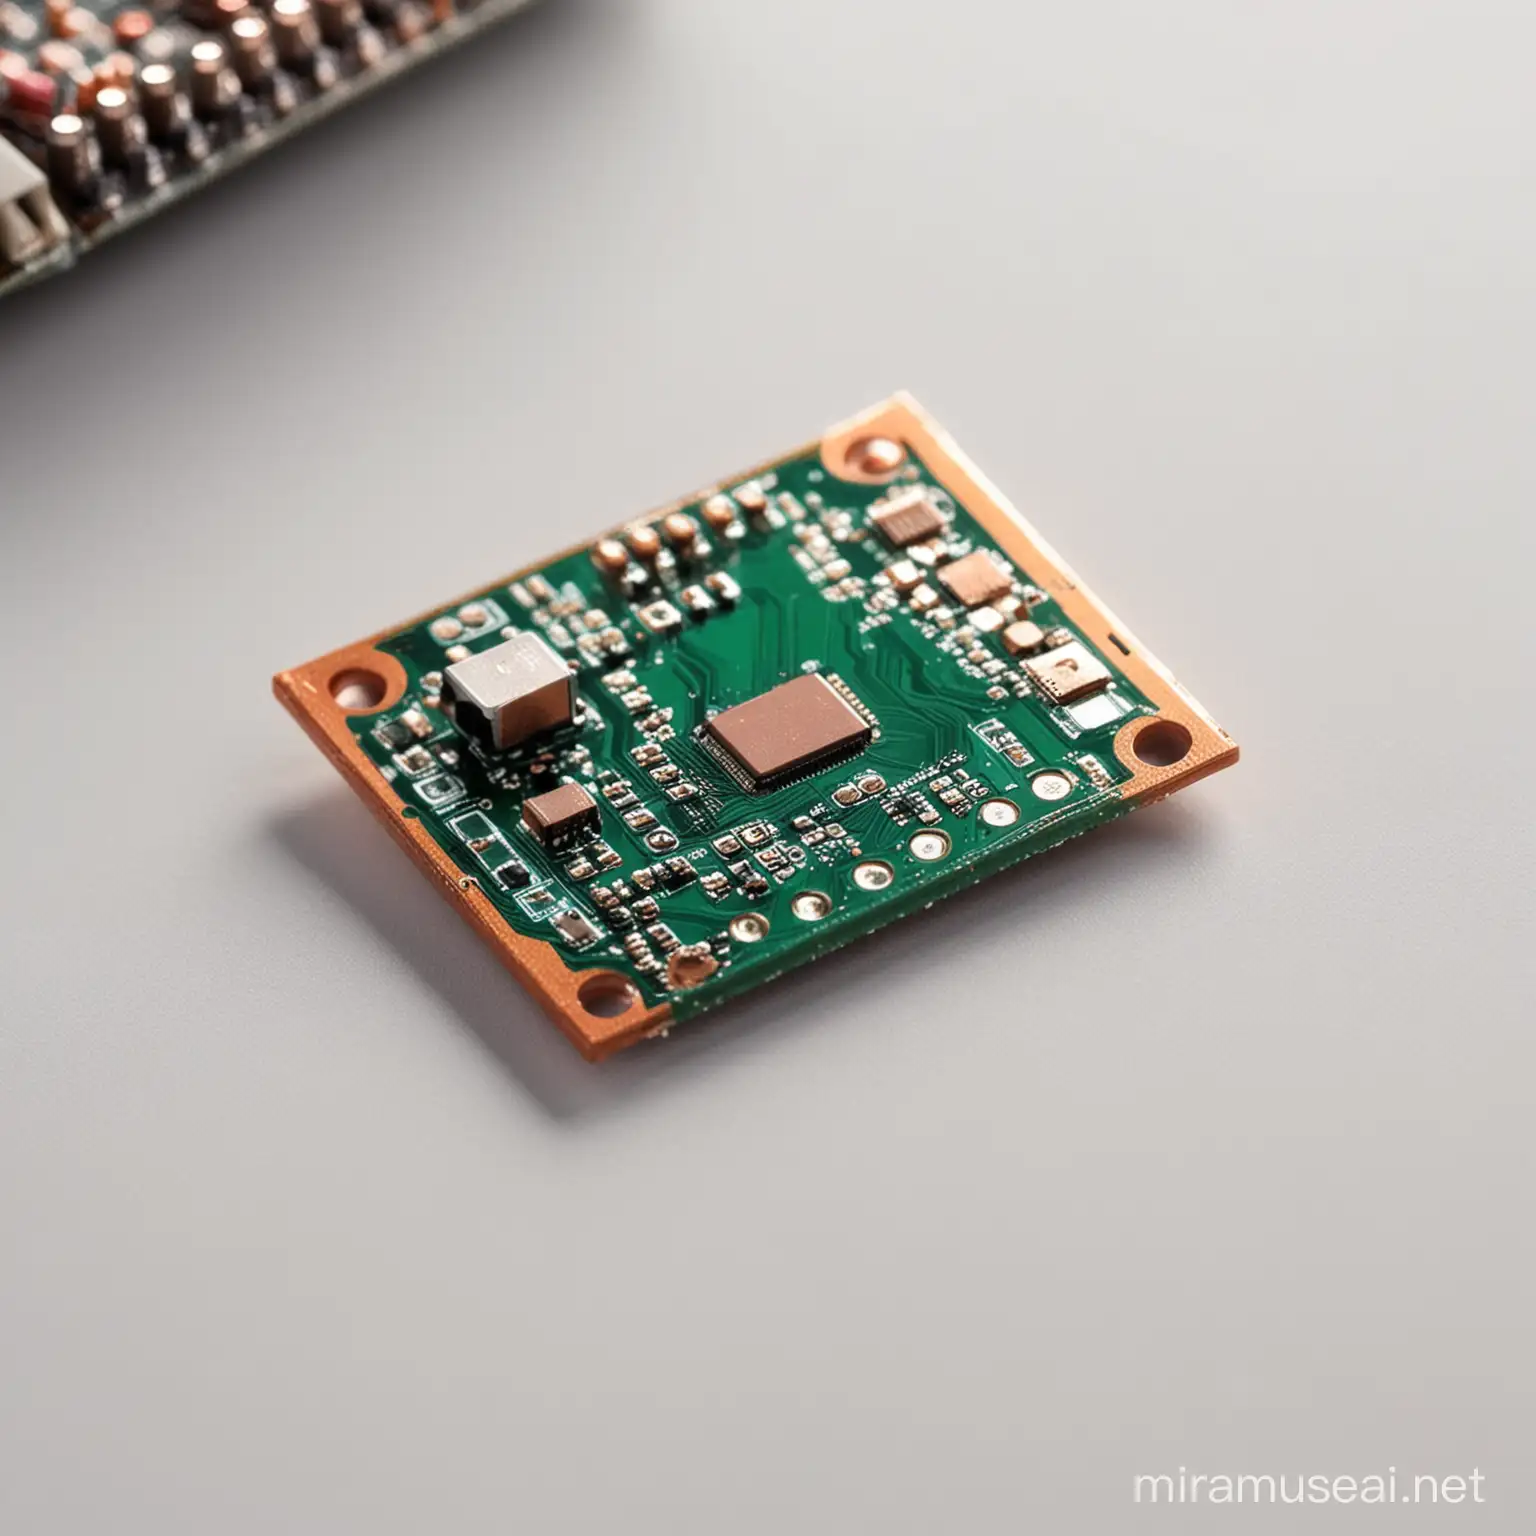 Shiny Copper Electrical Small PCB Board Illuminated Circuitry on White Background